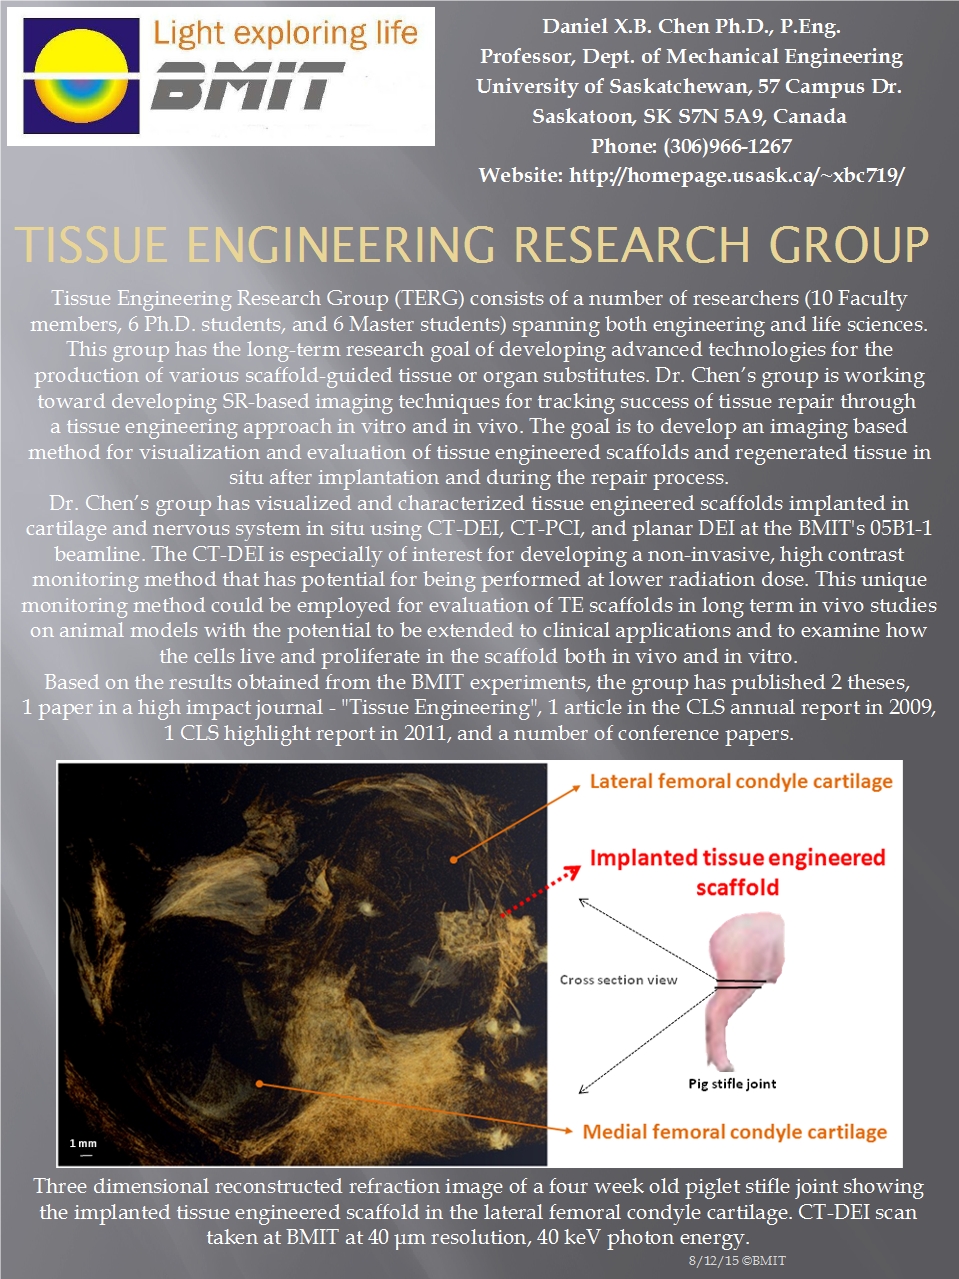 Tissue Engineering Research Group Image